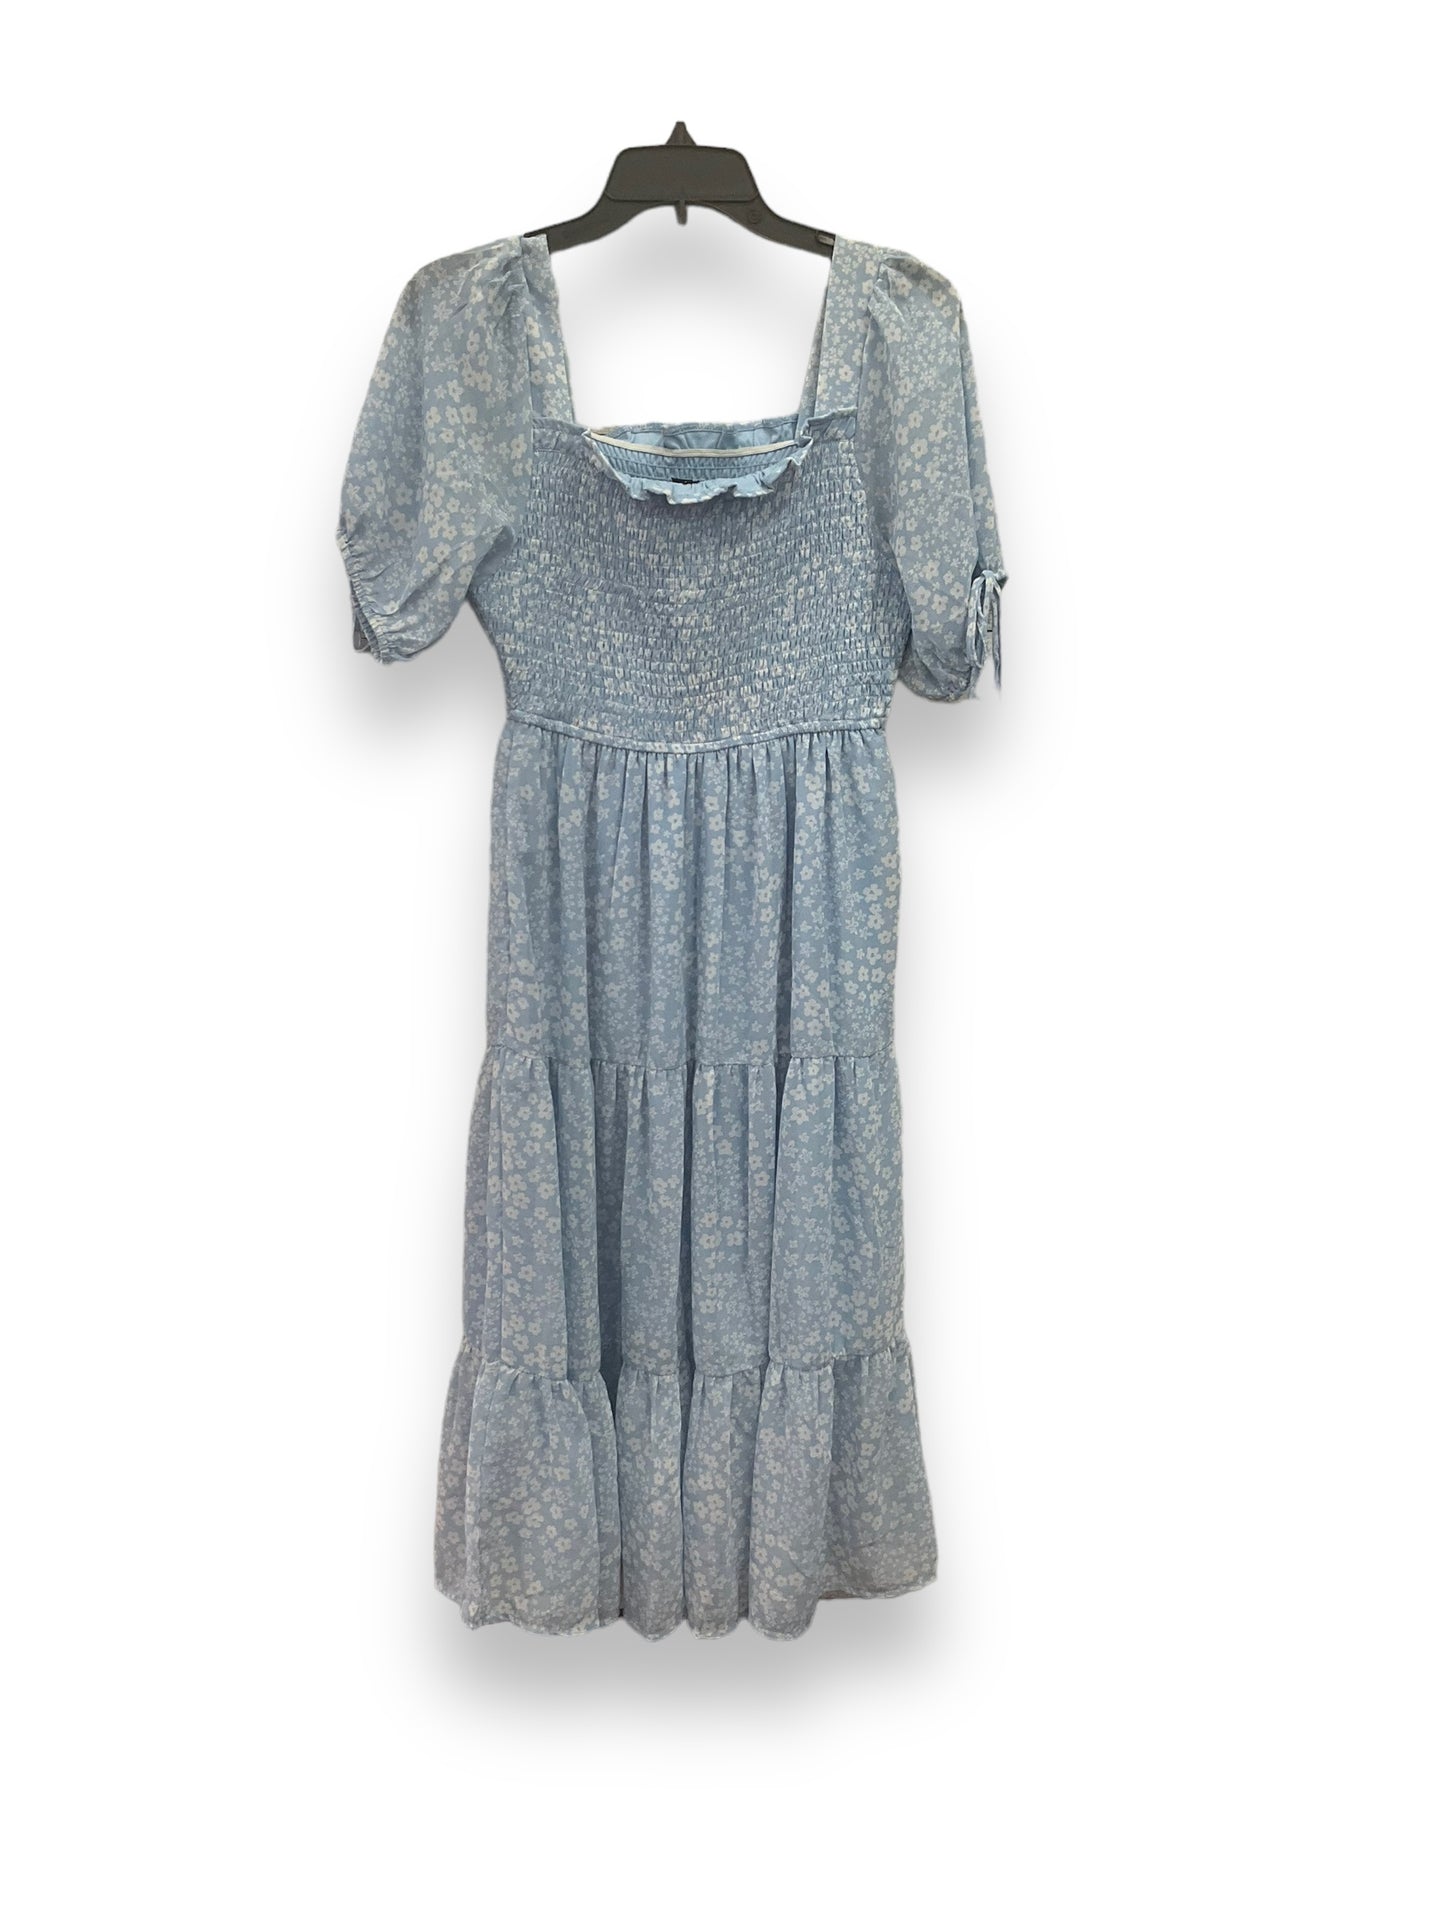 Dress Casual Midi By Influences  Size: M